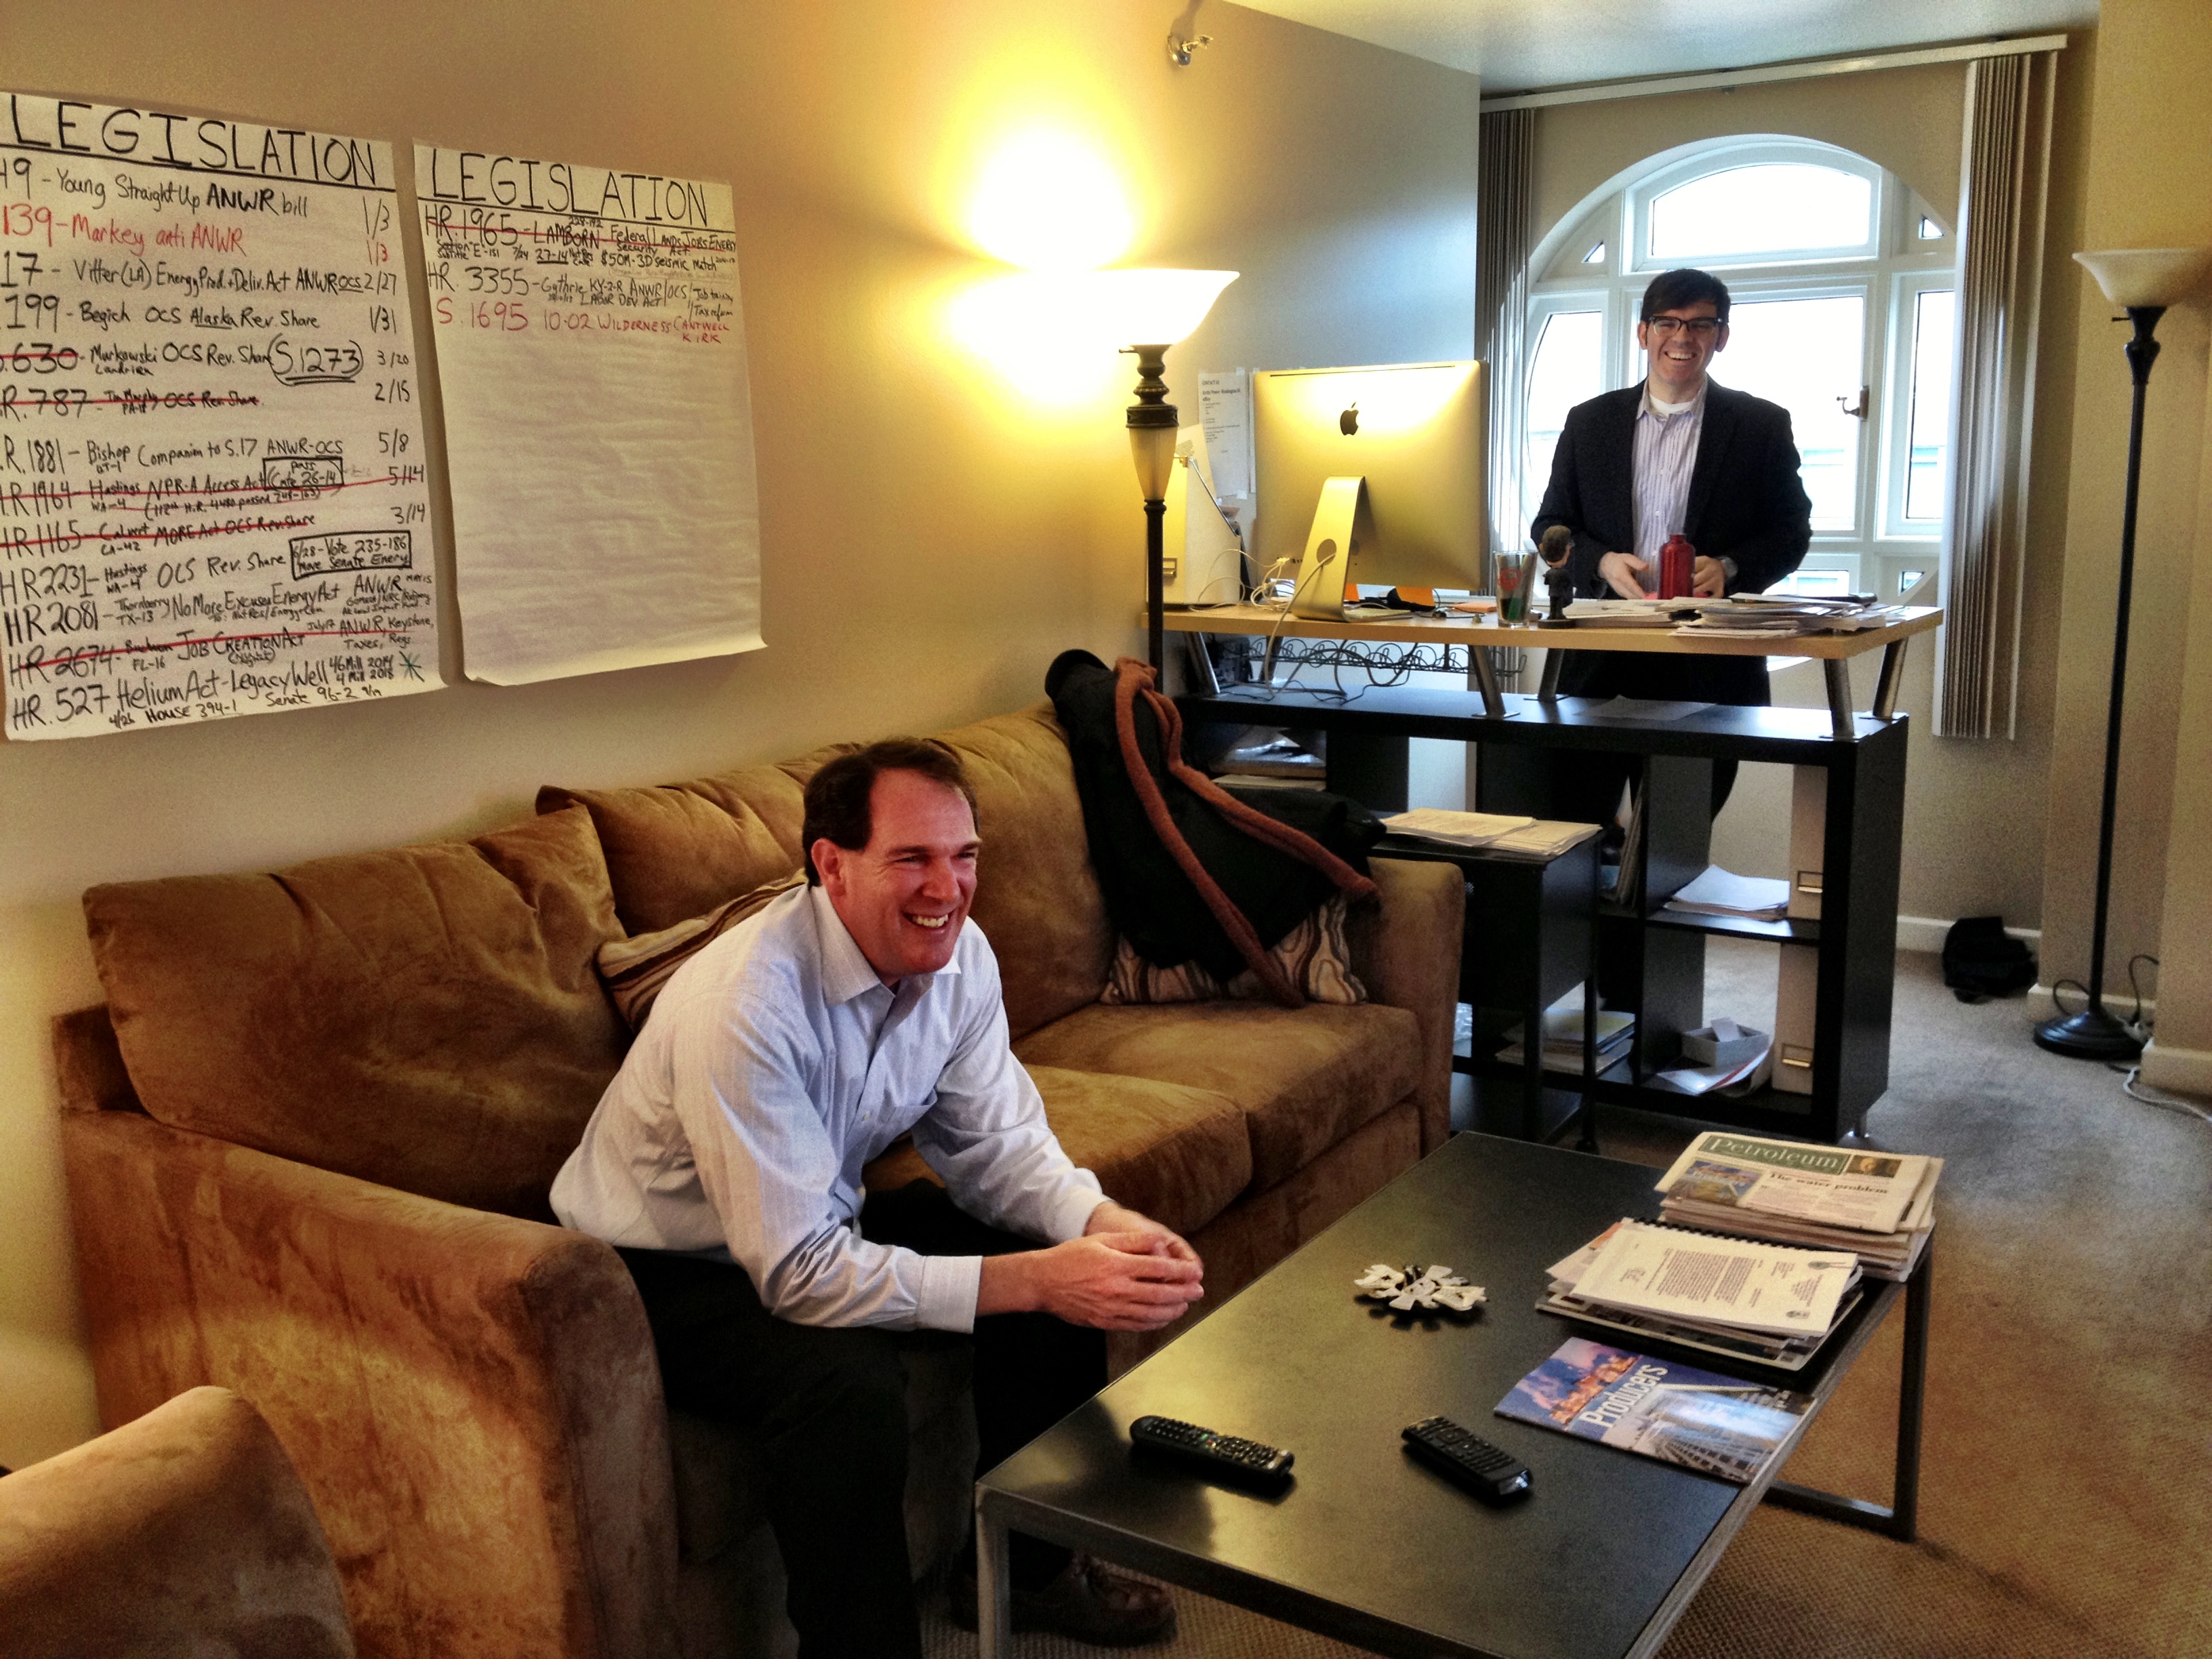 Adrian Herrera (seated) and Michael Shively, at Arctic Power’s office in Washington, D.C.